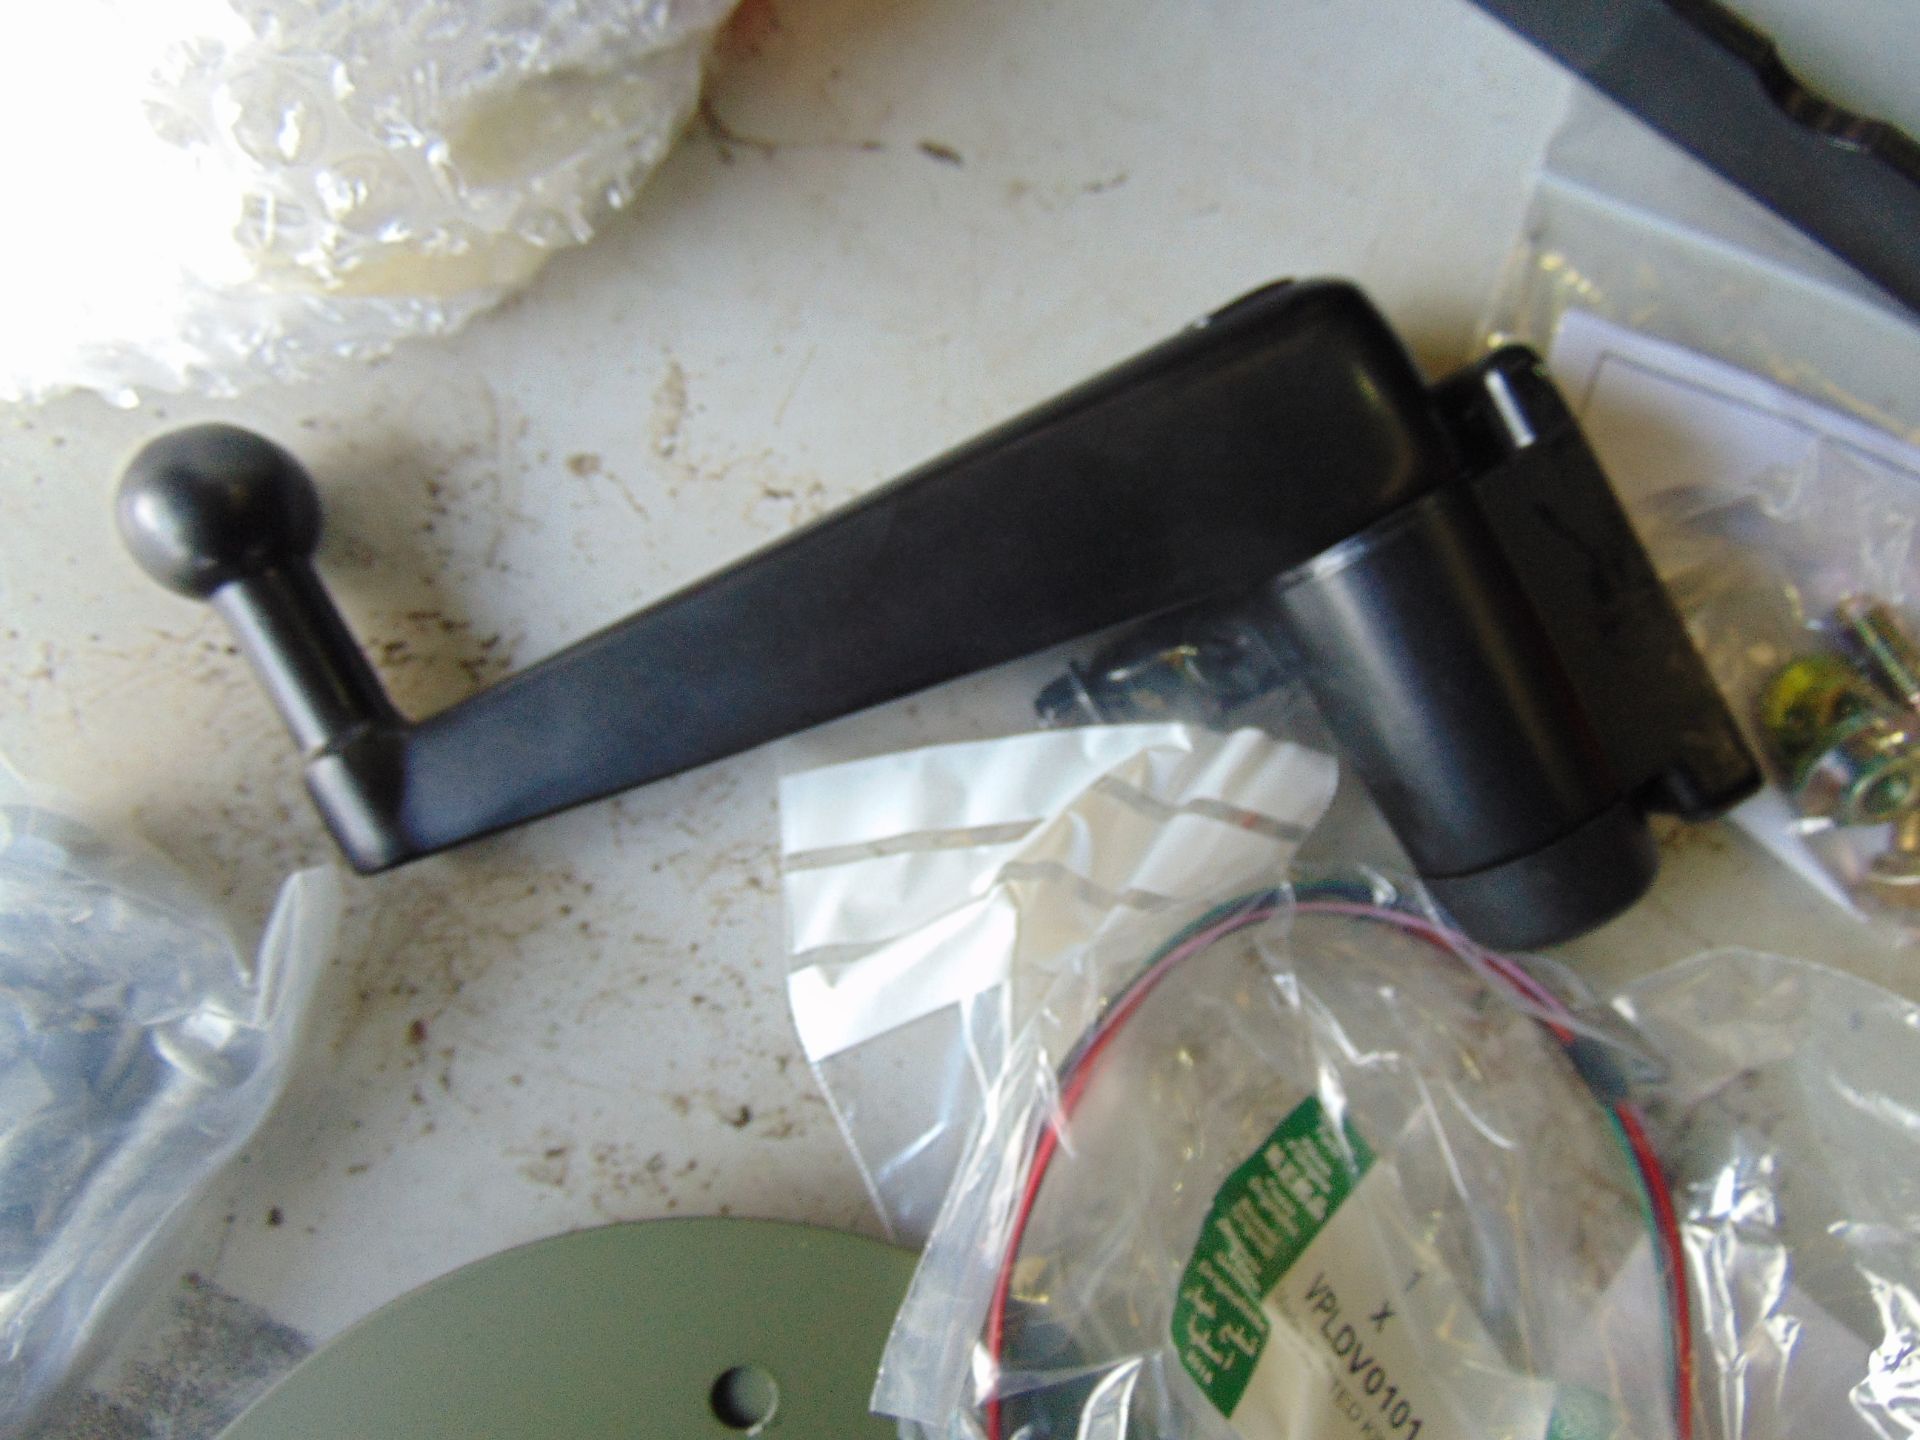 1X LAND ROVER REAR STEP, LIGHTS AND MIRROR ARM INSTALATION KIT NEW UNISSUED IN ORIGINAL BOX. - Image 3 of 7